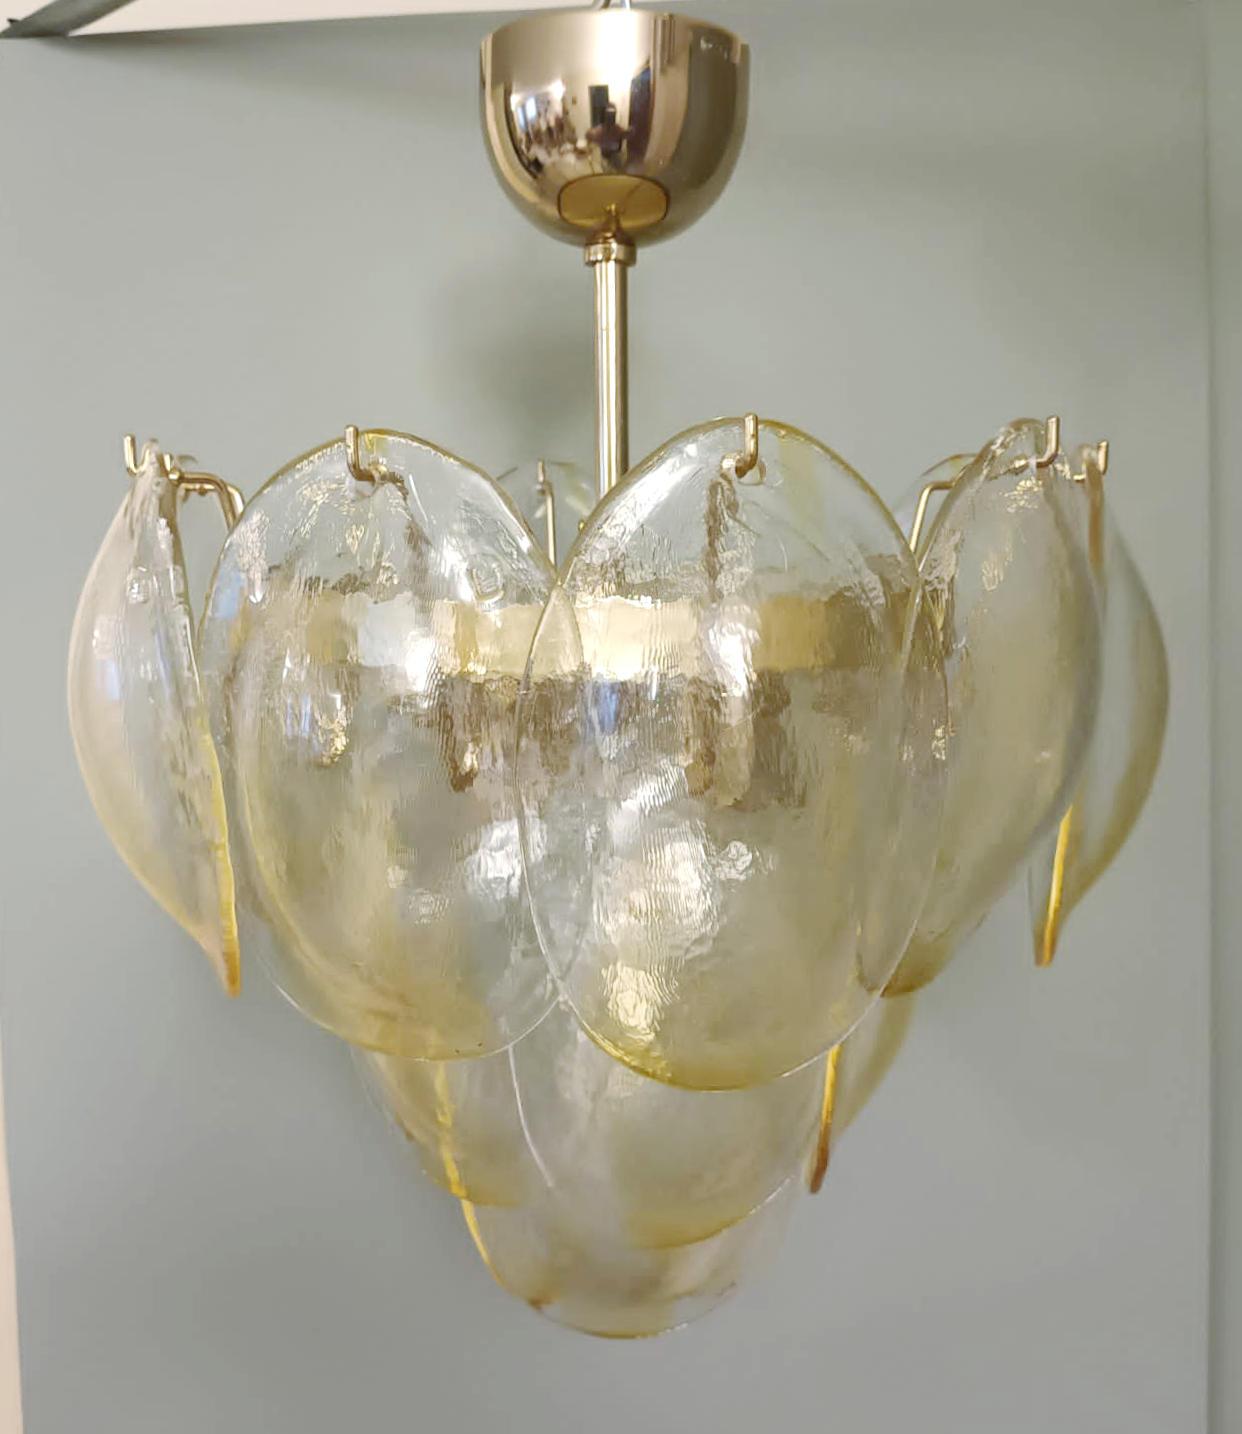 Vintage Italian chandelier with clear and amber glass shells suspended on brass frame / Made in Italy by La Murrina, circa 1980s
Original mark on glasses and ceiling canopy
Measures: diameter 16 inches, height 20 inches including rod and canopy
3